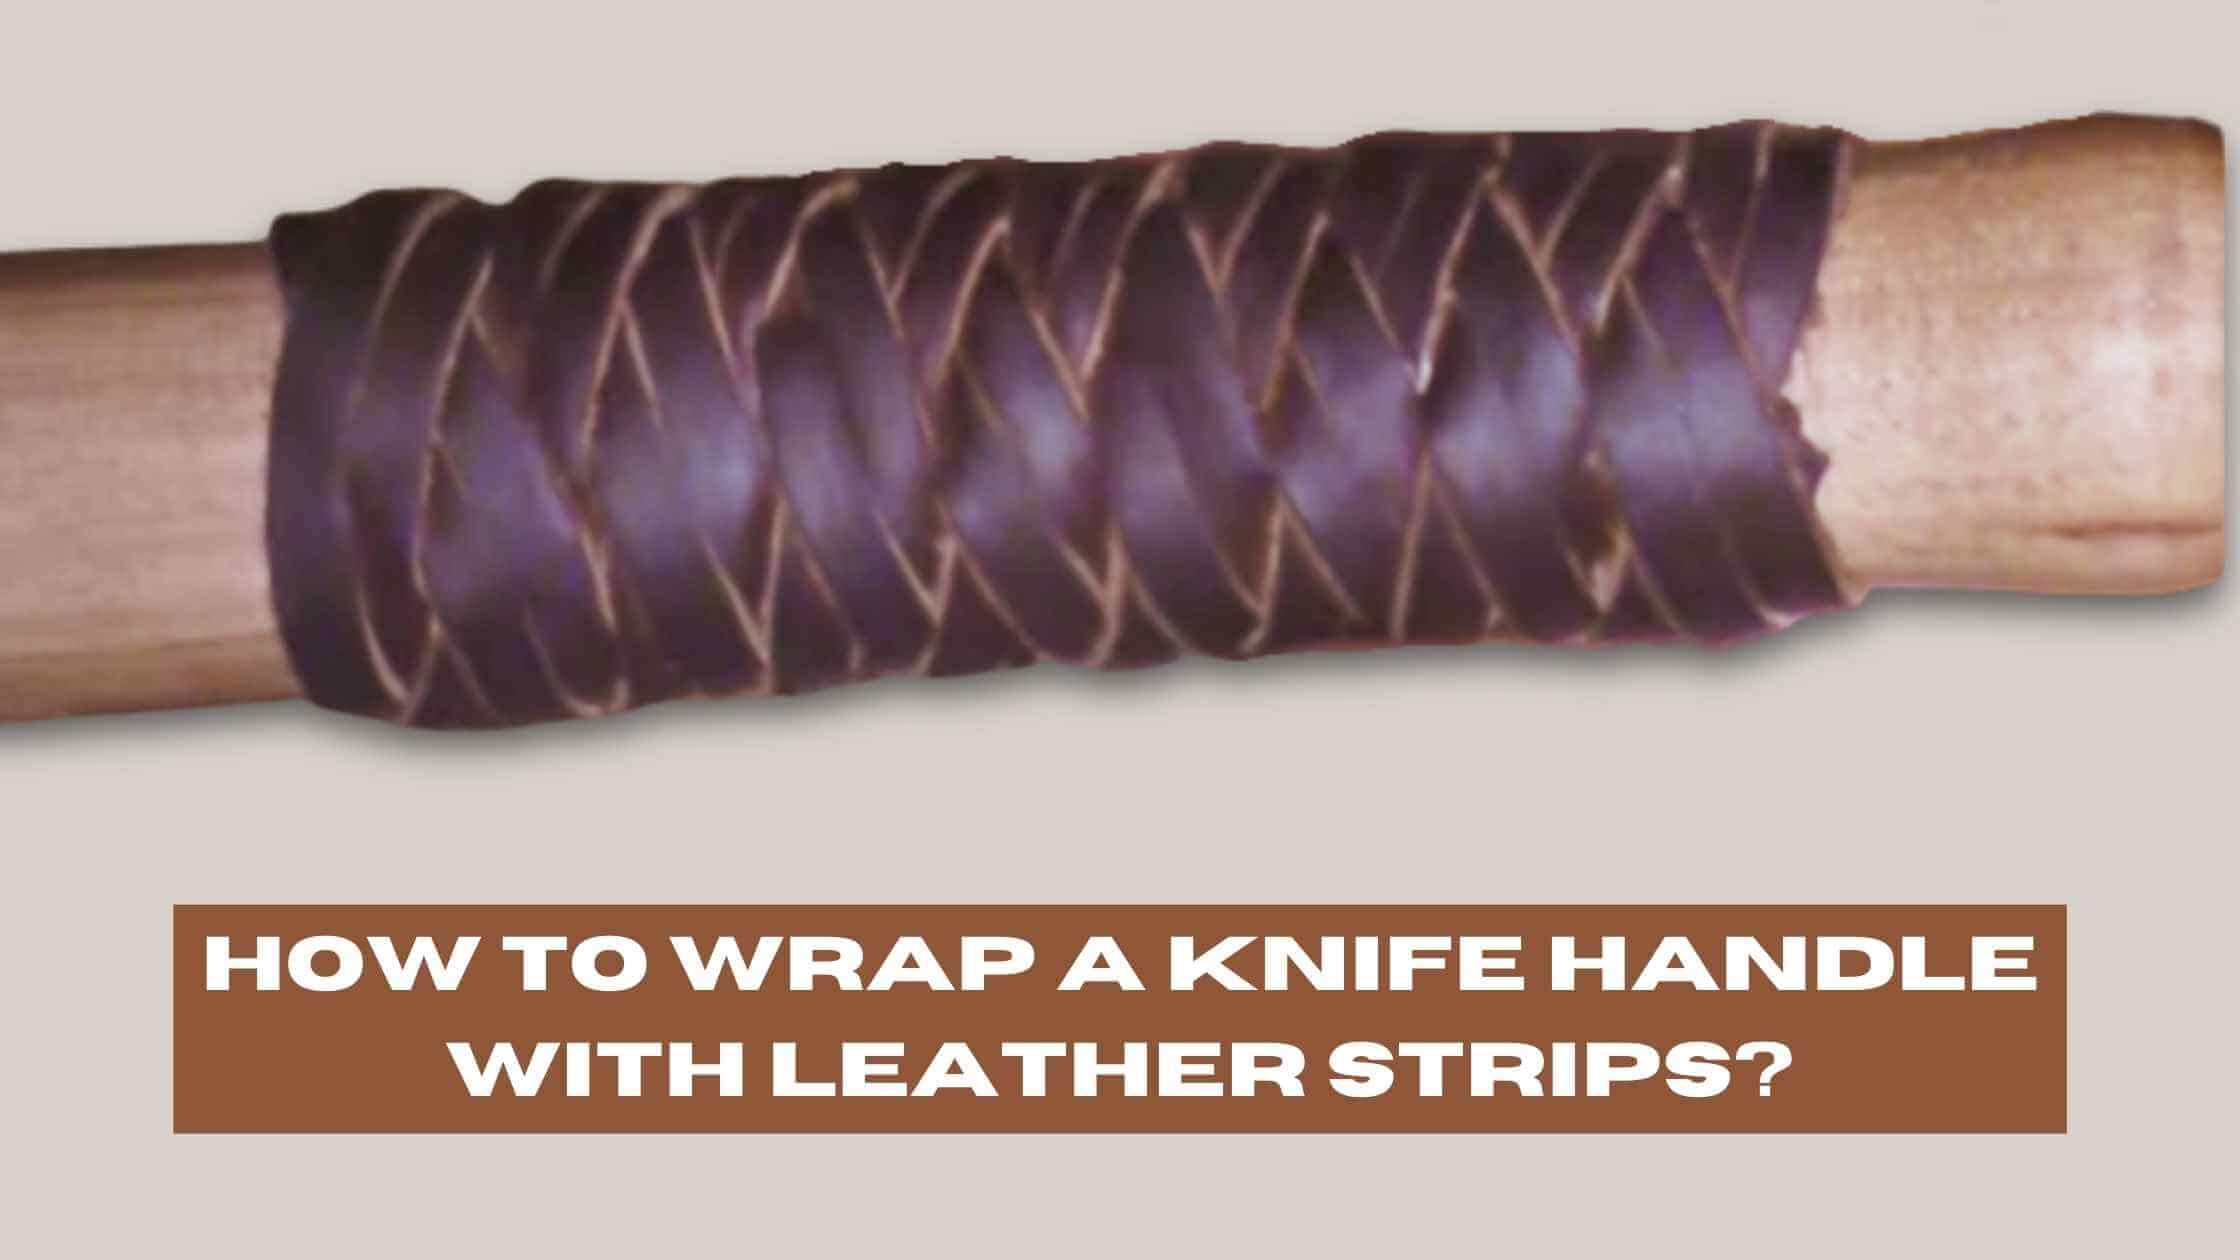 How to Wrap a Knife Handle with Leather Strips? (Step-by-Step Guide)